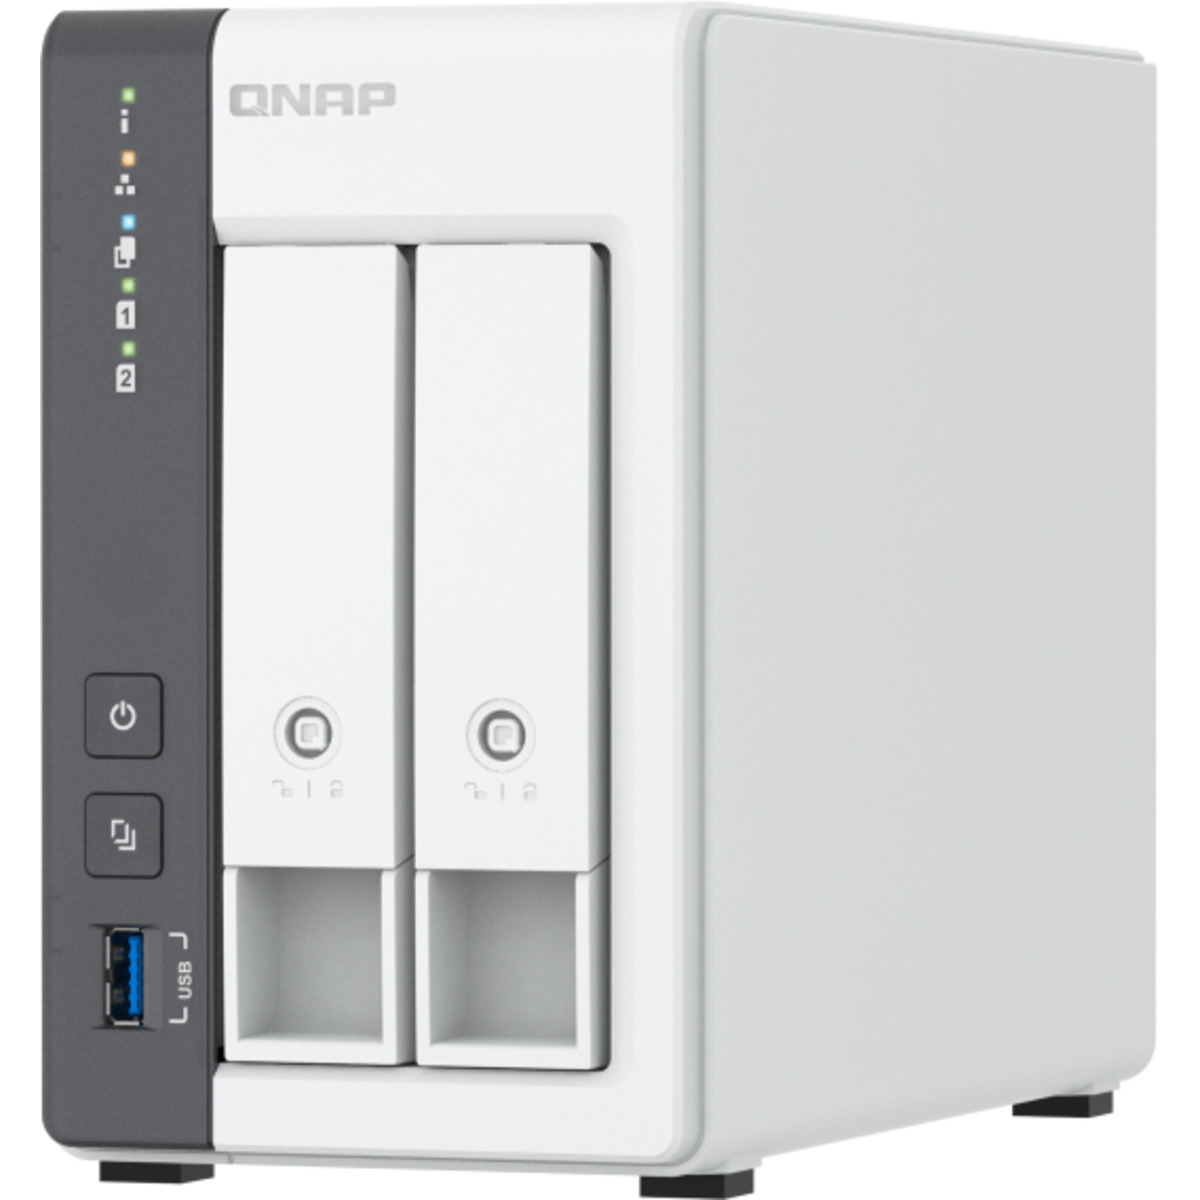 QNAP TS-216G 12tb 2-Bay Desktop Personal / Basic Home / Small Office NAS - Network Attached Storage Device 2x6tb Seagate IronWolf Pro ST6000NT001 3.5 7200rpm SATA 6Gb/s HDD NAS Class Drives Installed - Burn-In Tested TS-216G